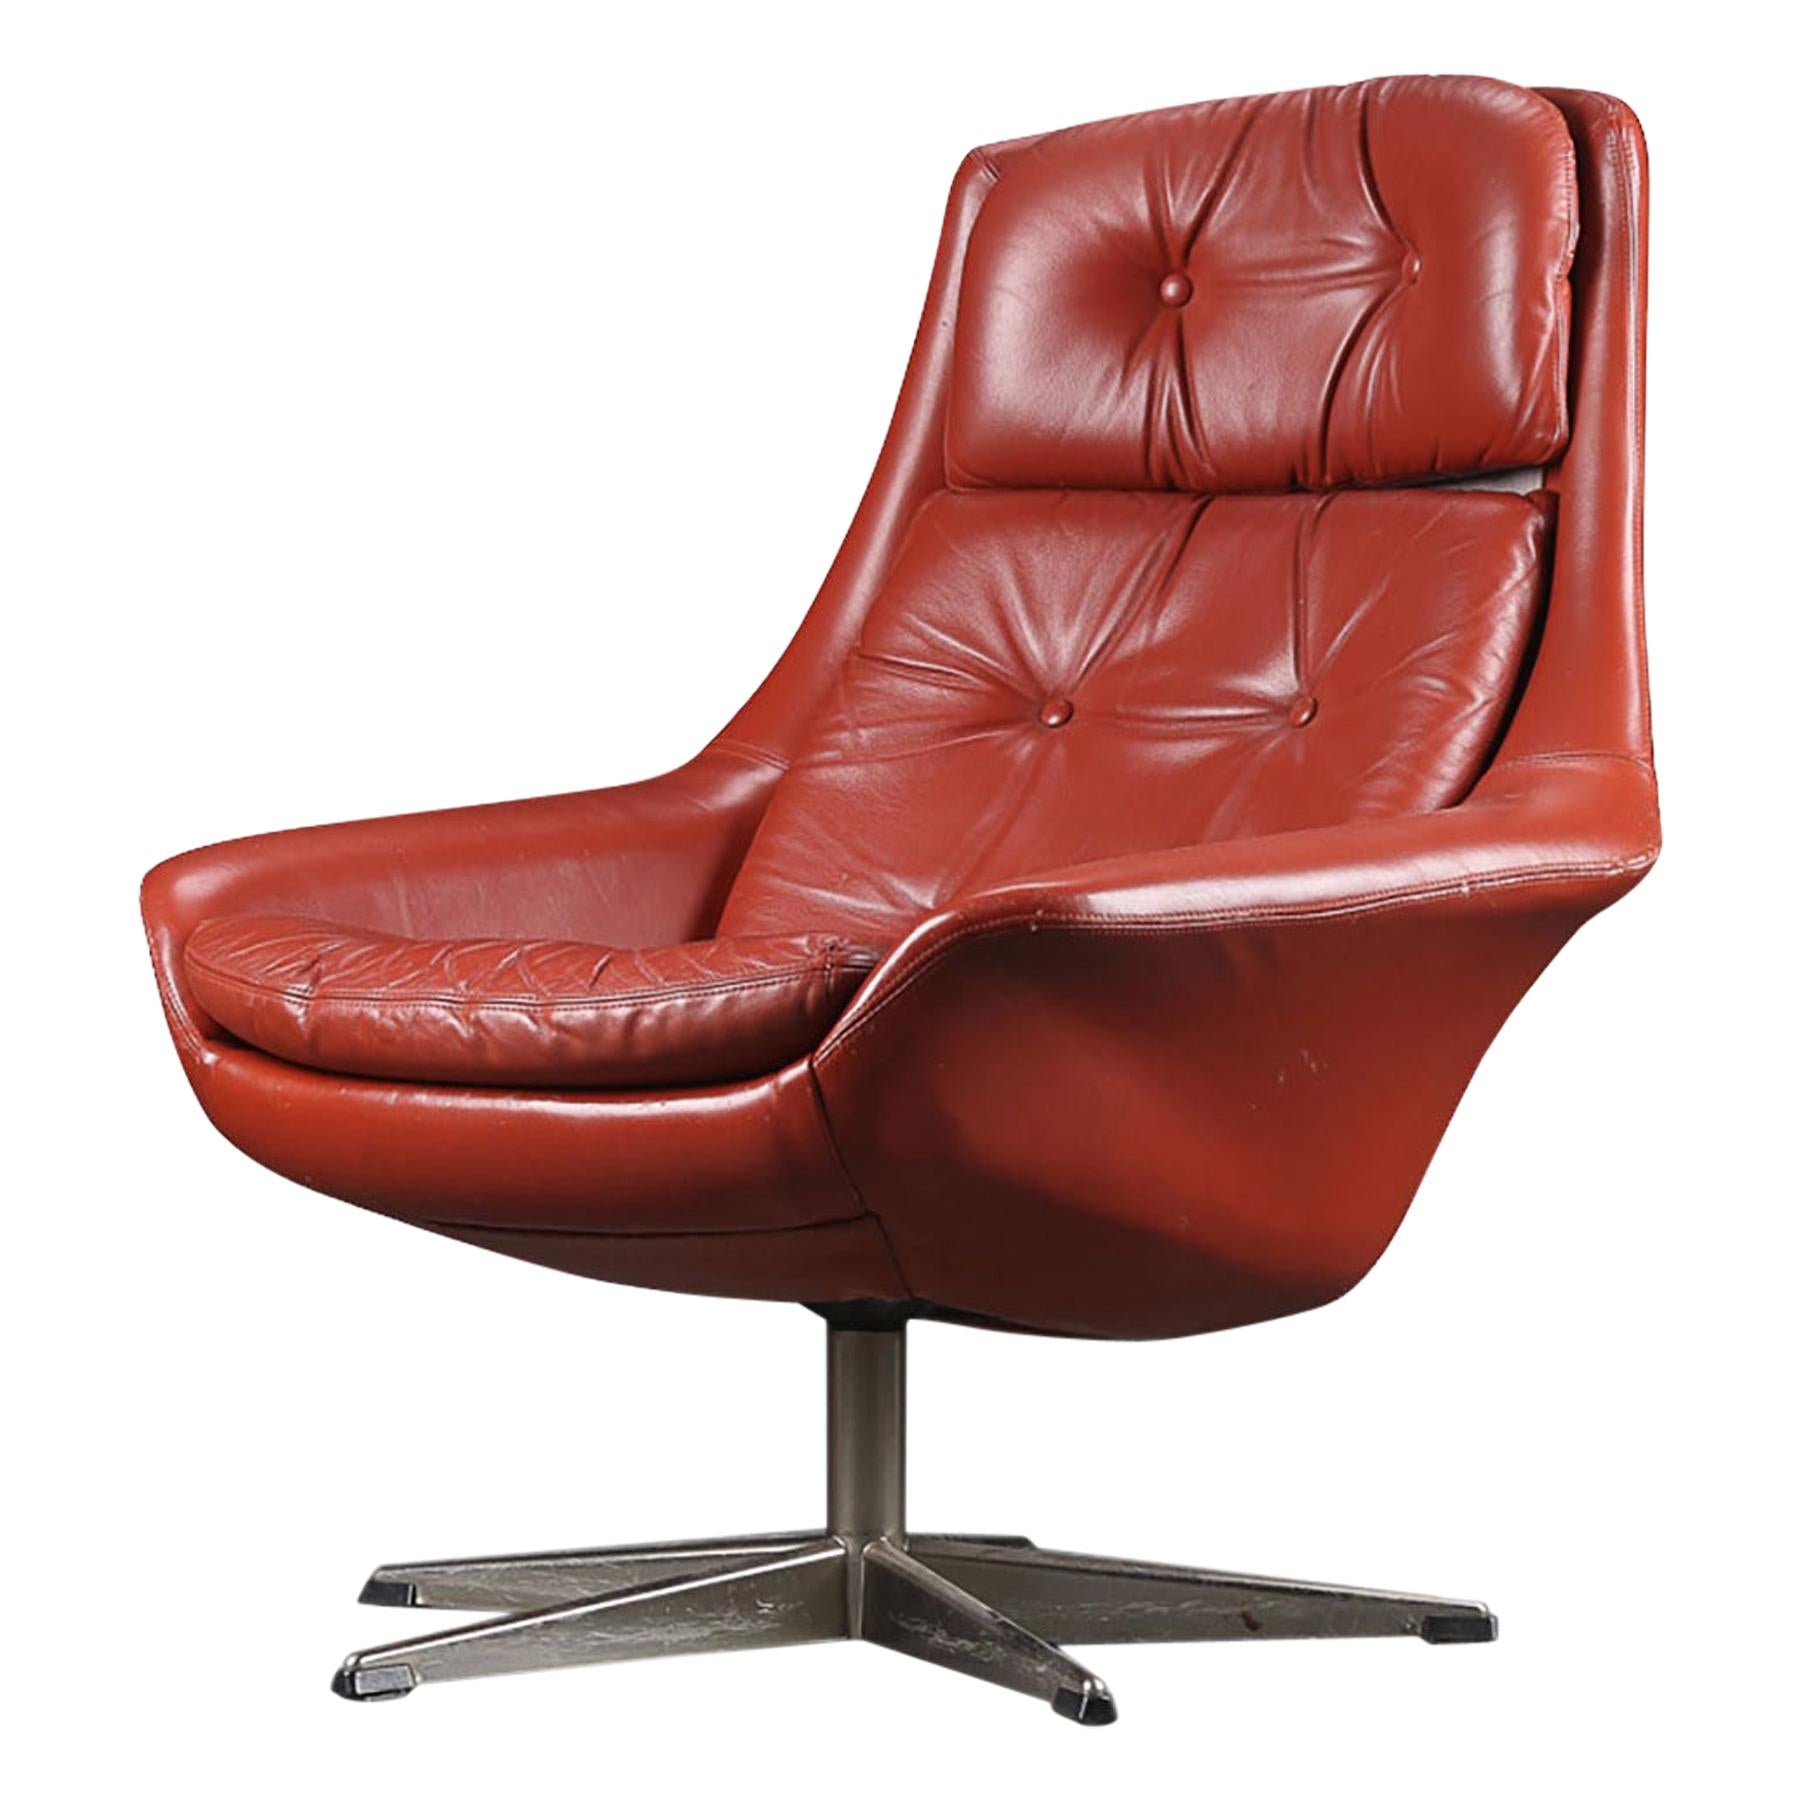 H.W. Klein Highback Swivel Chair in Red Leather